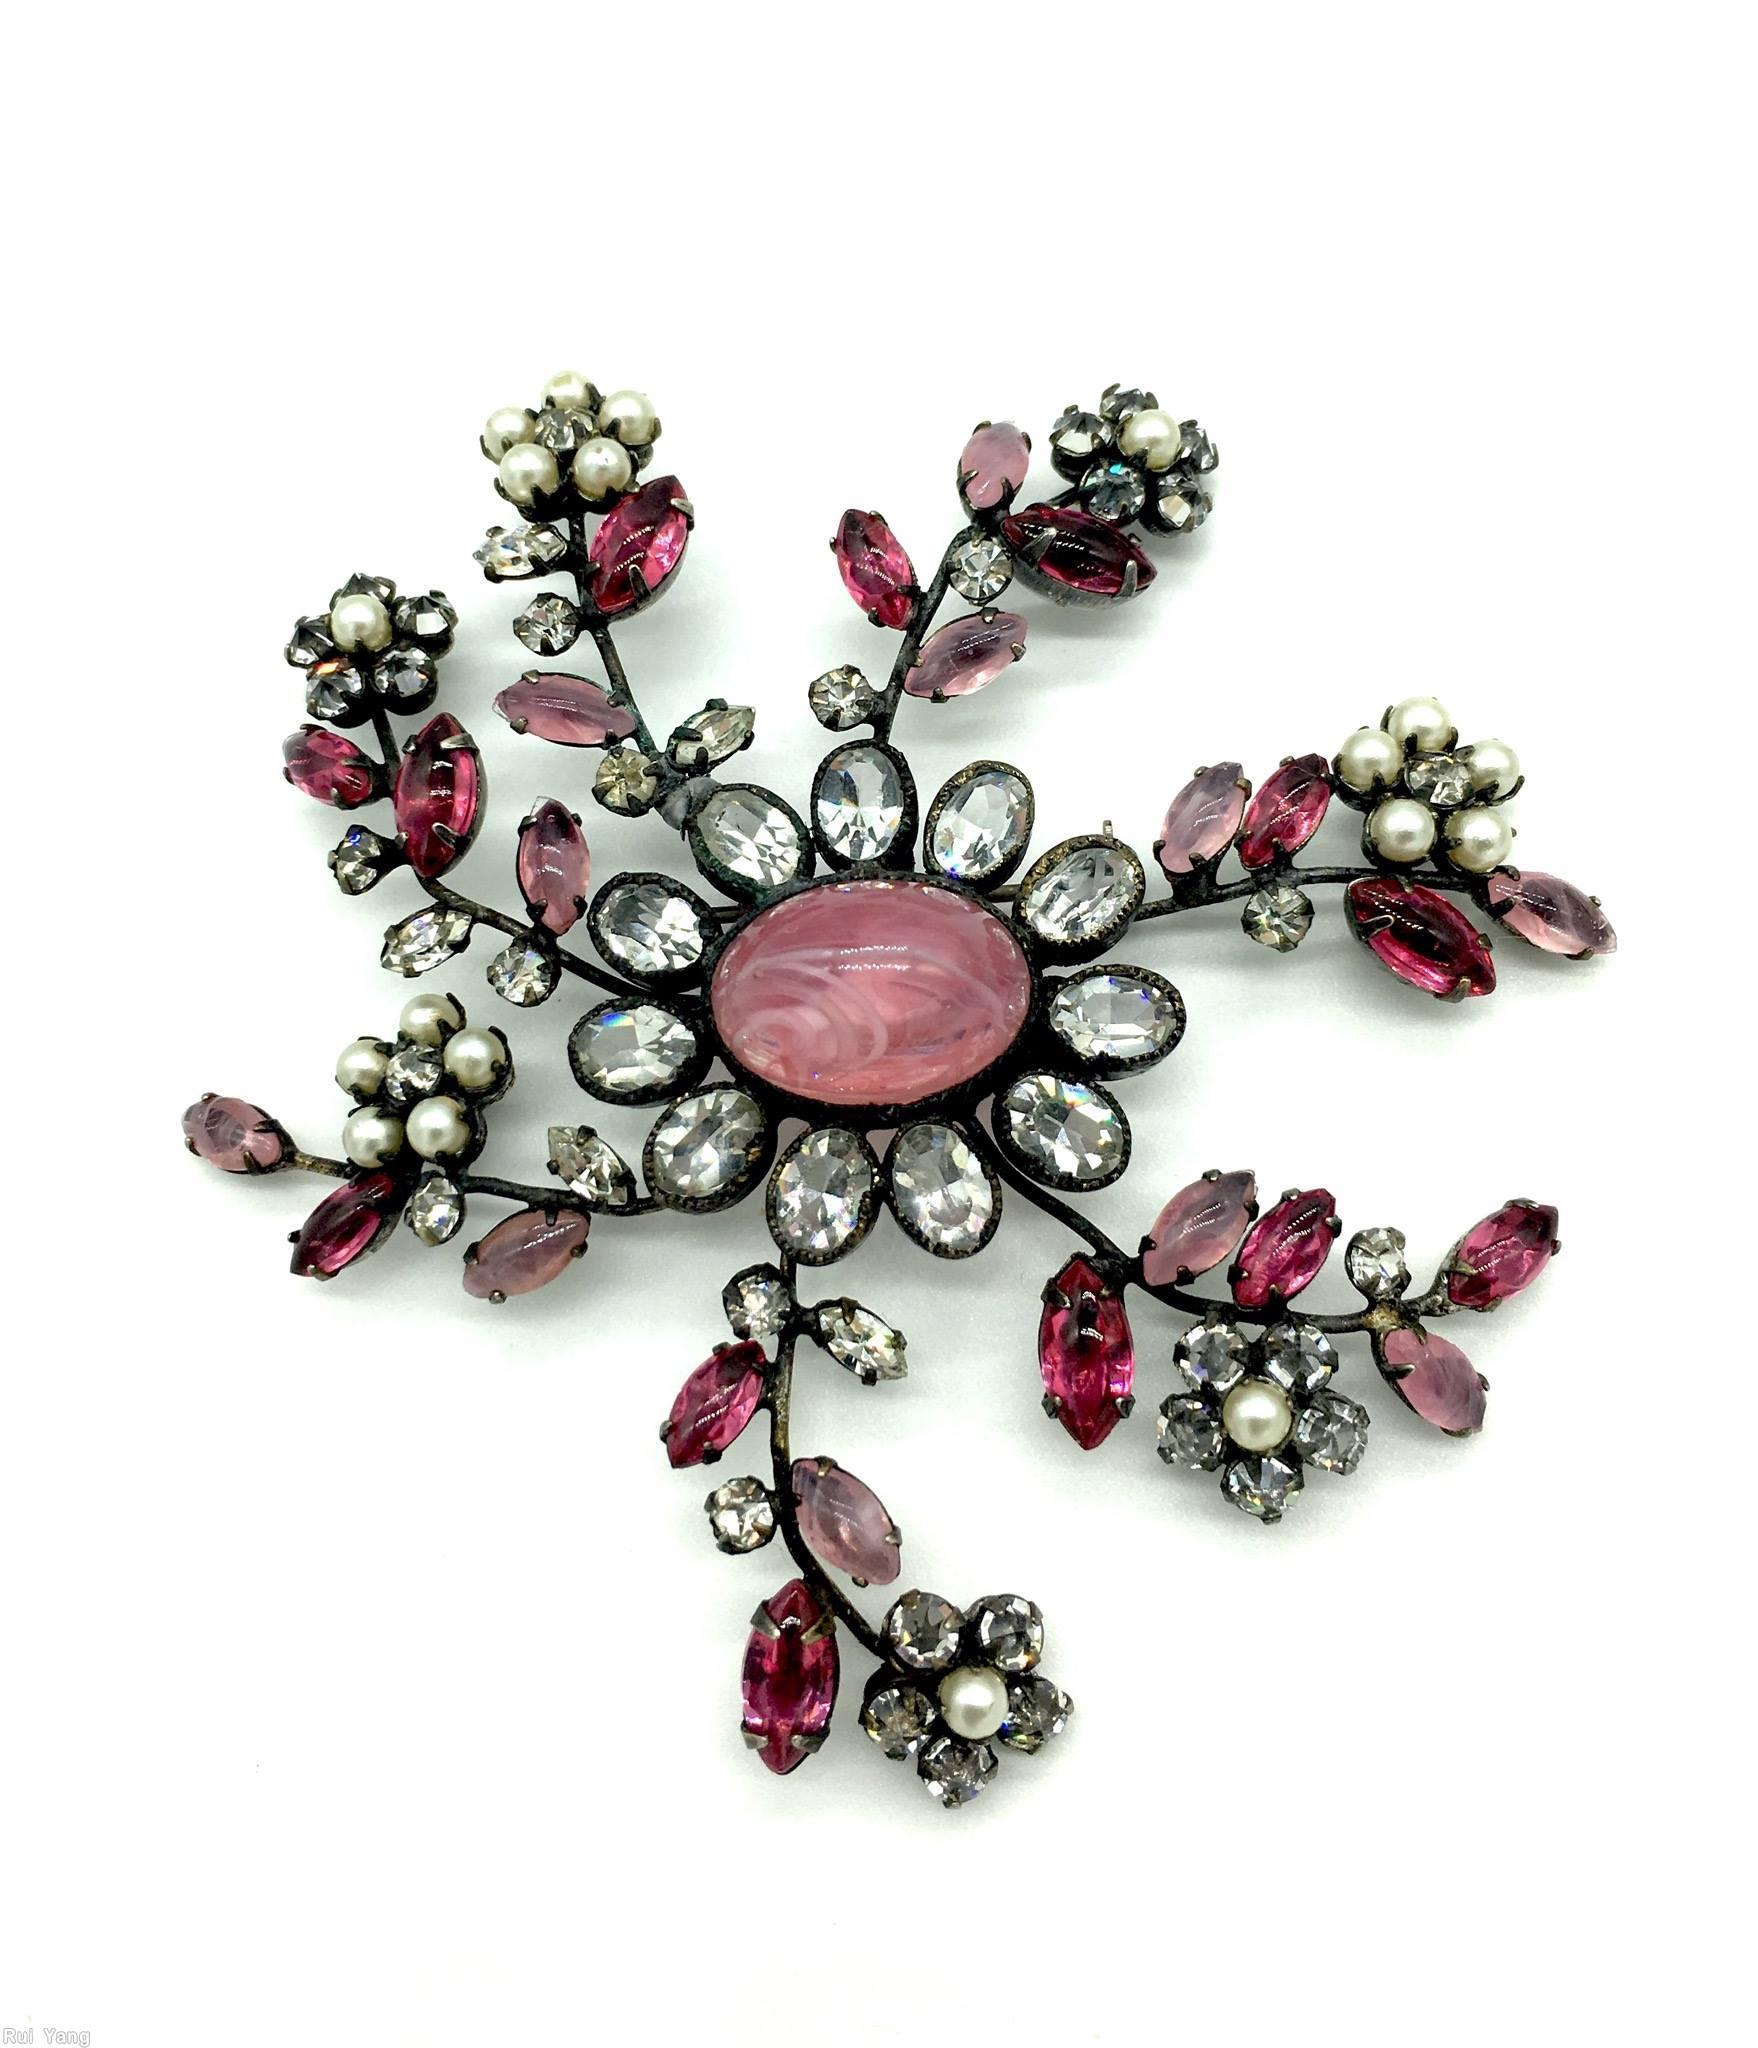 Schreiner 7 clustered flower long branch sprawling radial flower pin large oval center 11 surrounding stone marbled pink fuchsia ice pink crystal faux pearl seeds jewelry